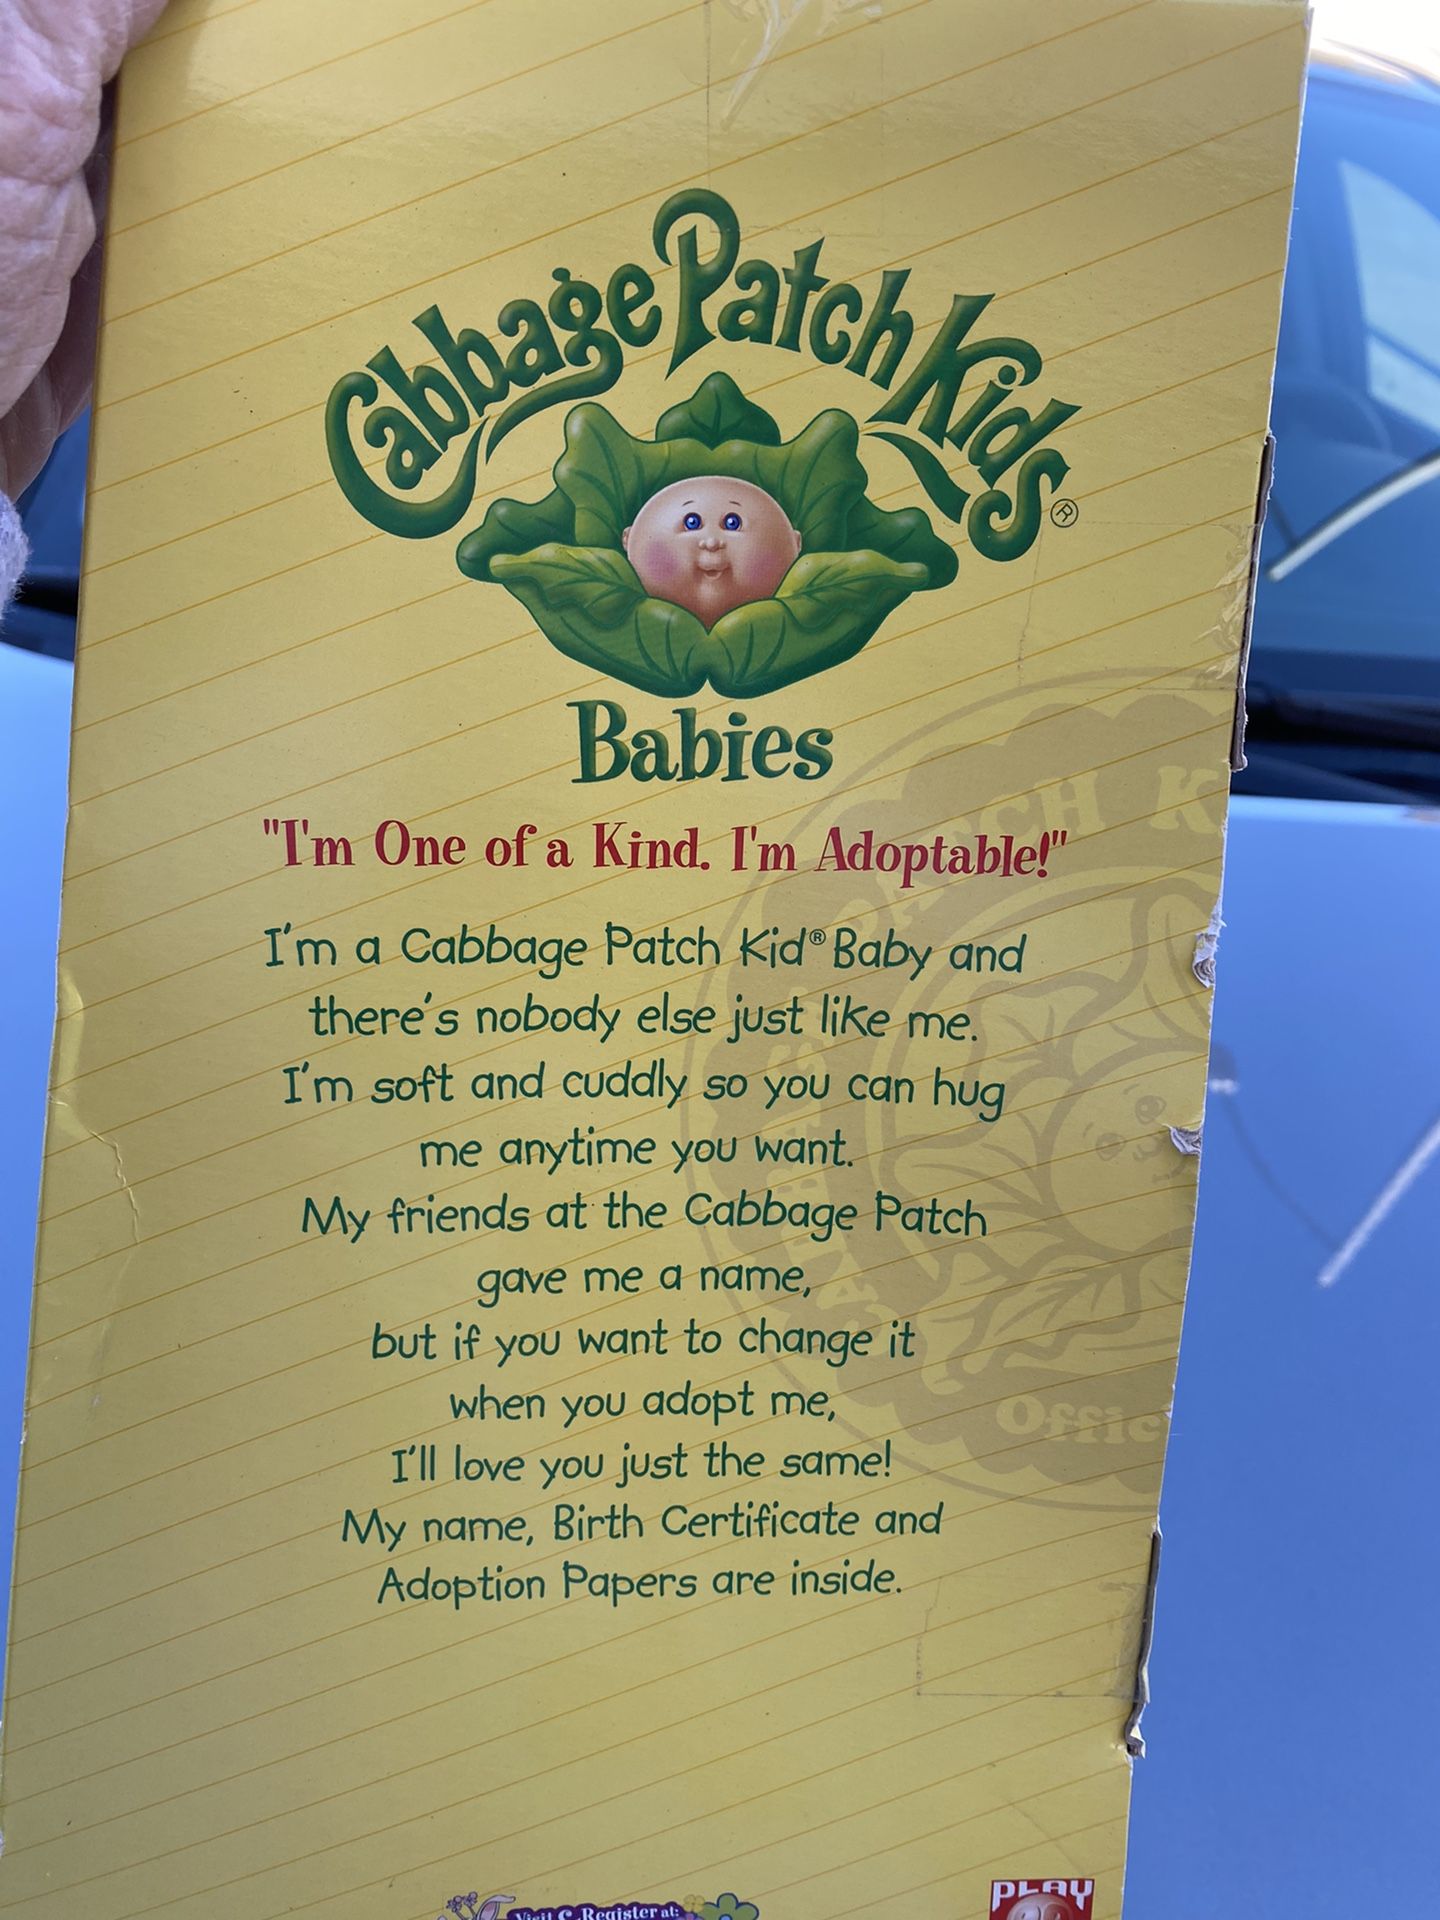 Brand new Cabbage Patch Doll still in box $75